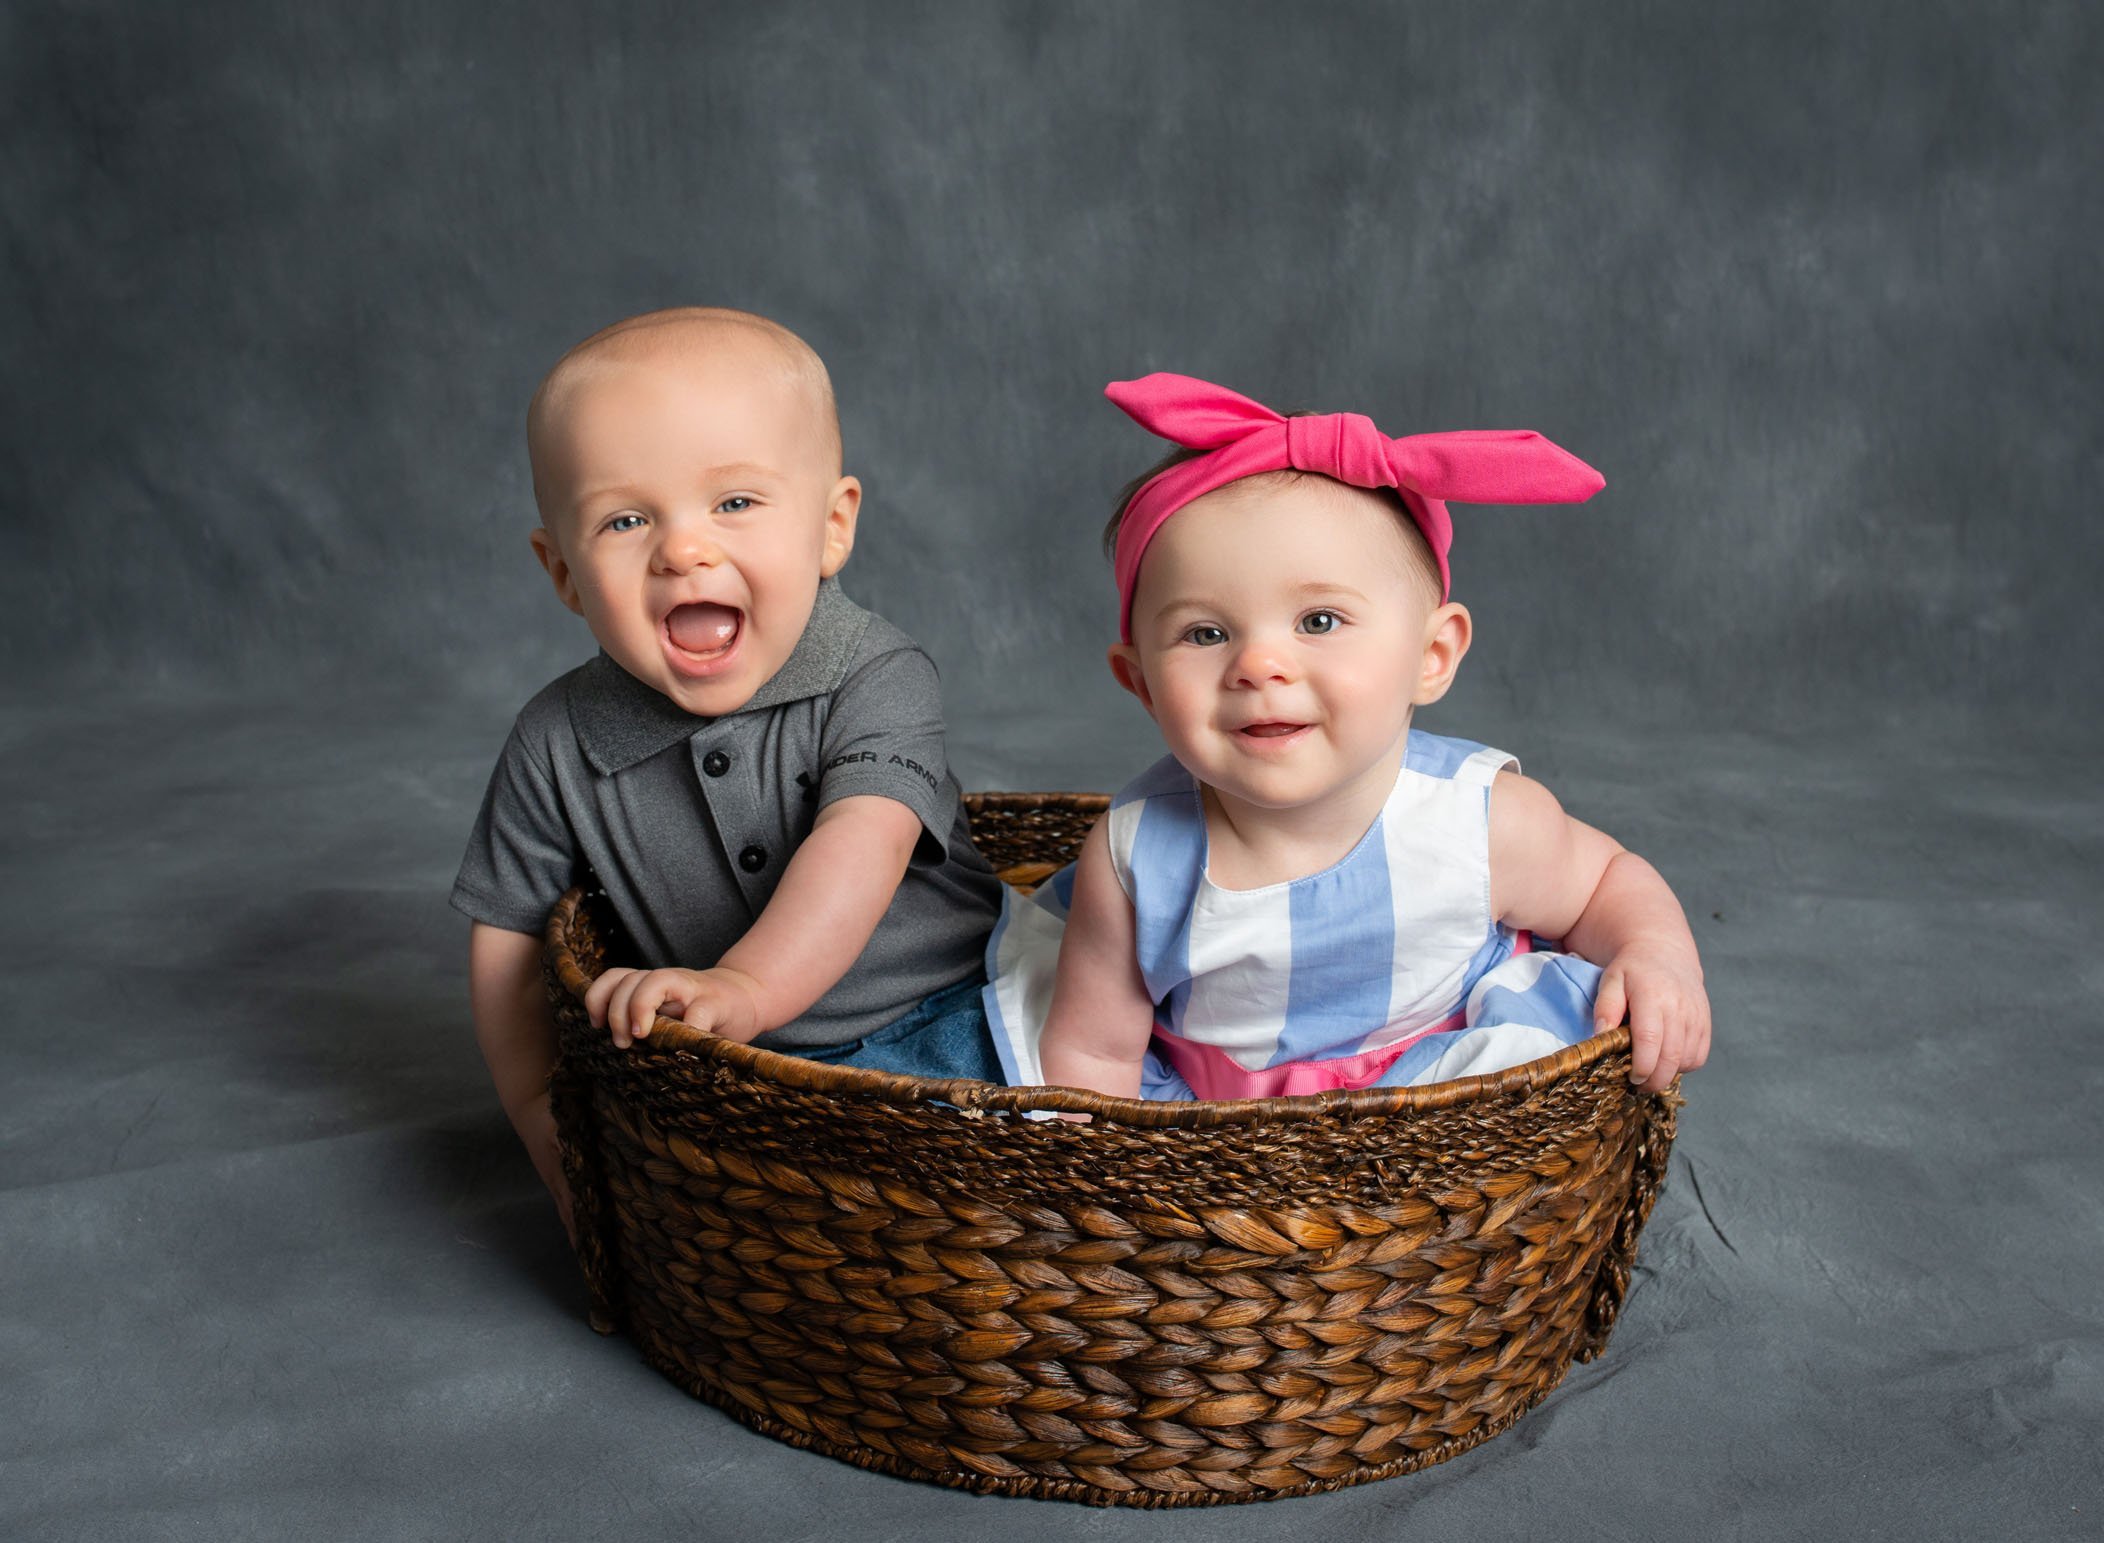 6 month old girl boy twins sitting in basket smiling at the camera